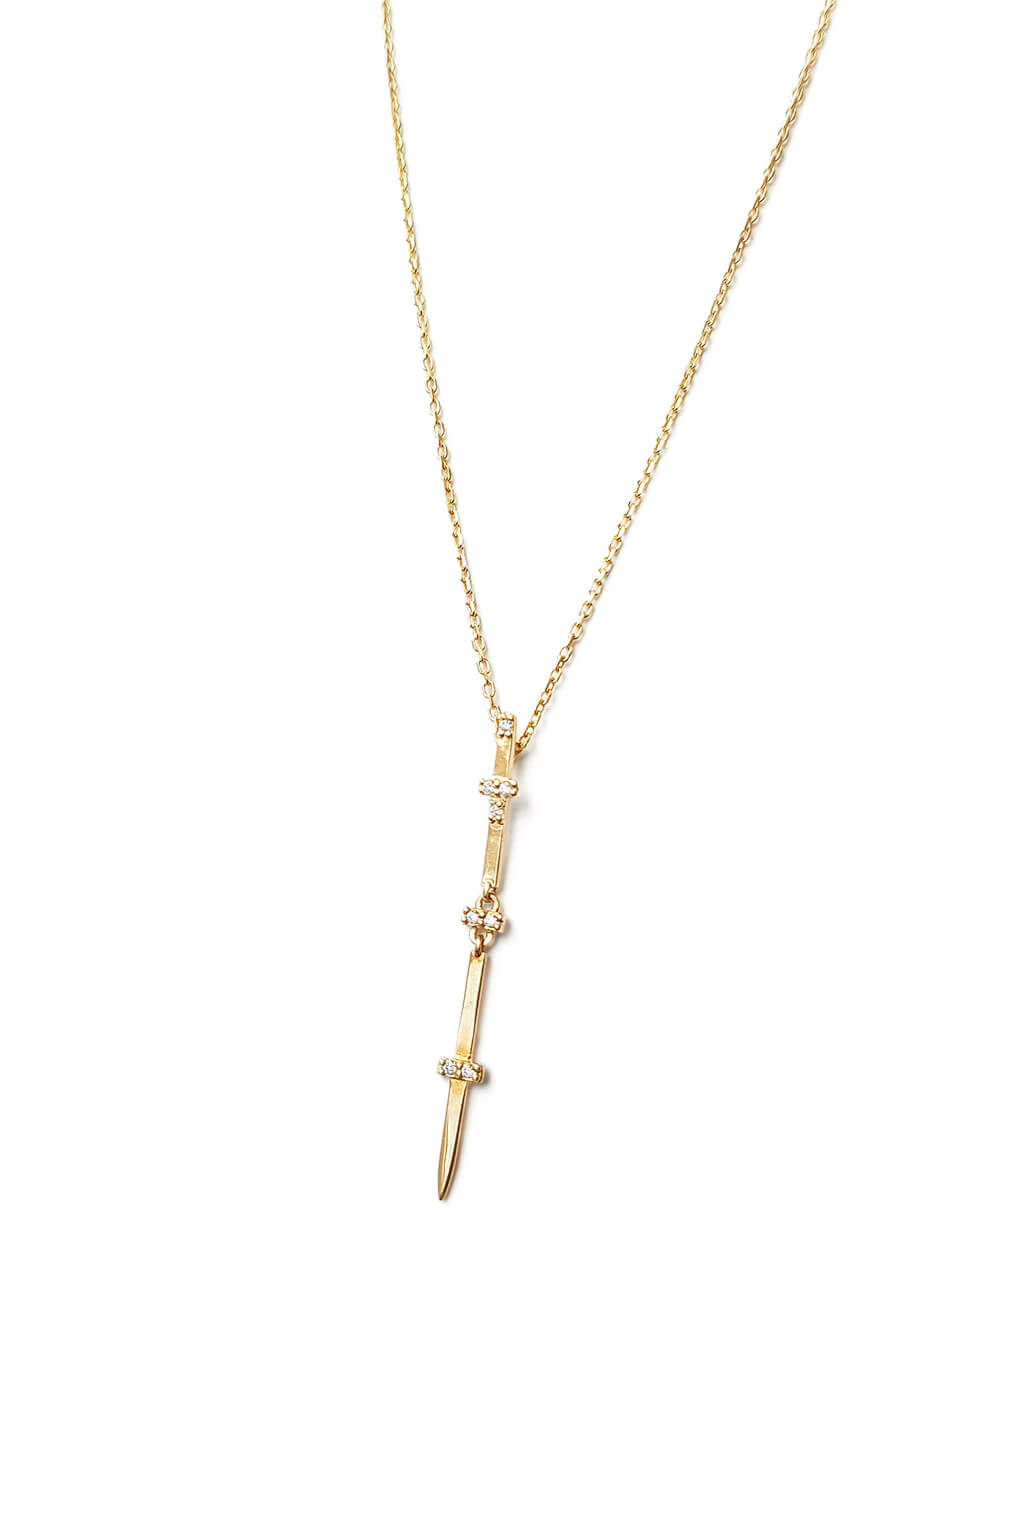 Long Sword gold necklace